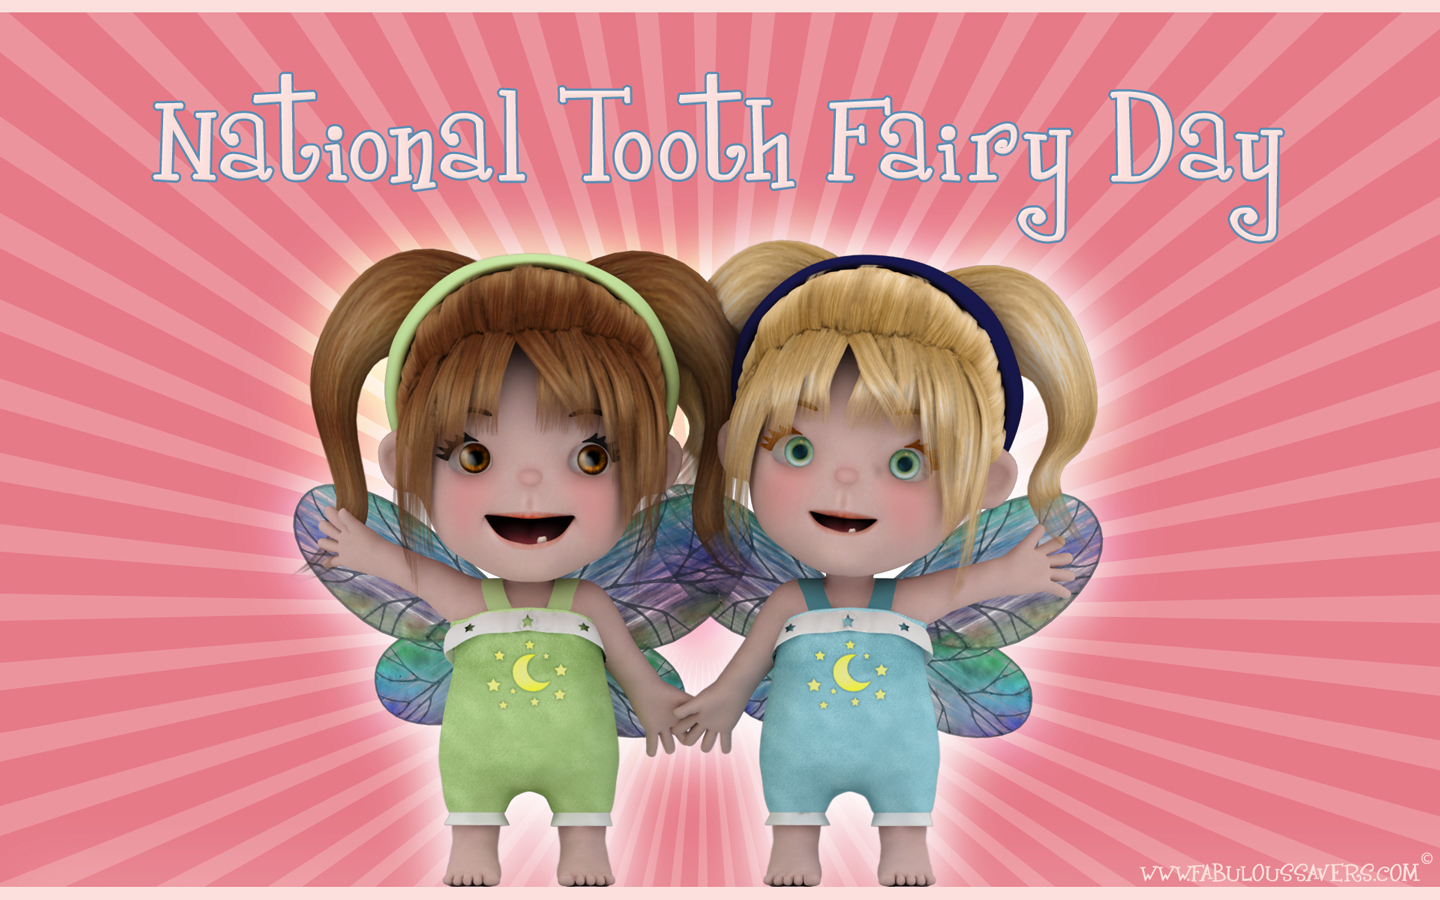 National Tooth Fairy Day Puter Desktop Wallpaper Pictures